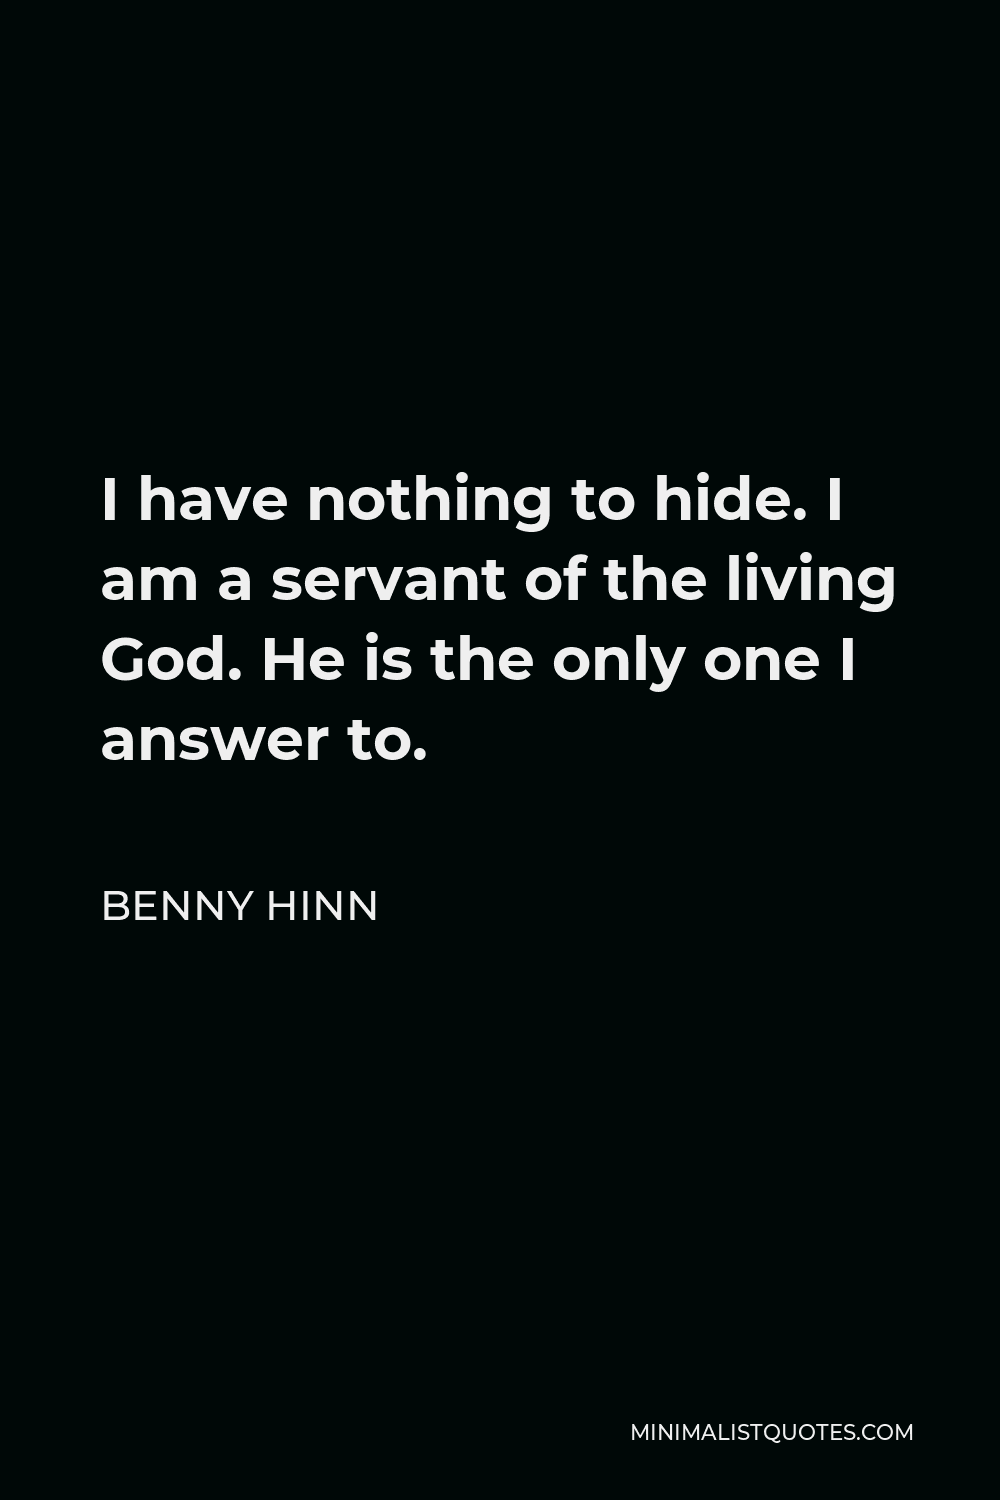 Benny Hinn Quote - I have nothing to hide. I am a servant of the living God. He is the only one I answer to.